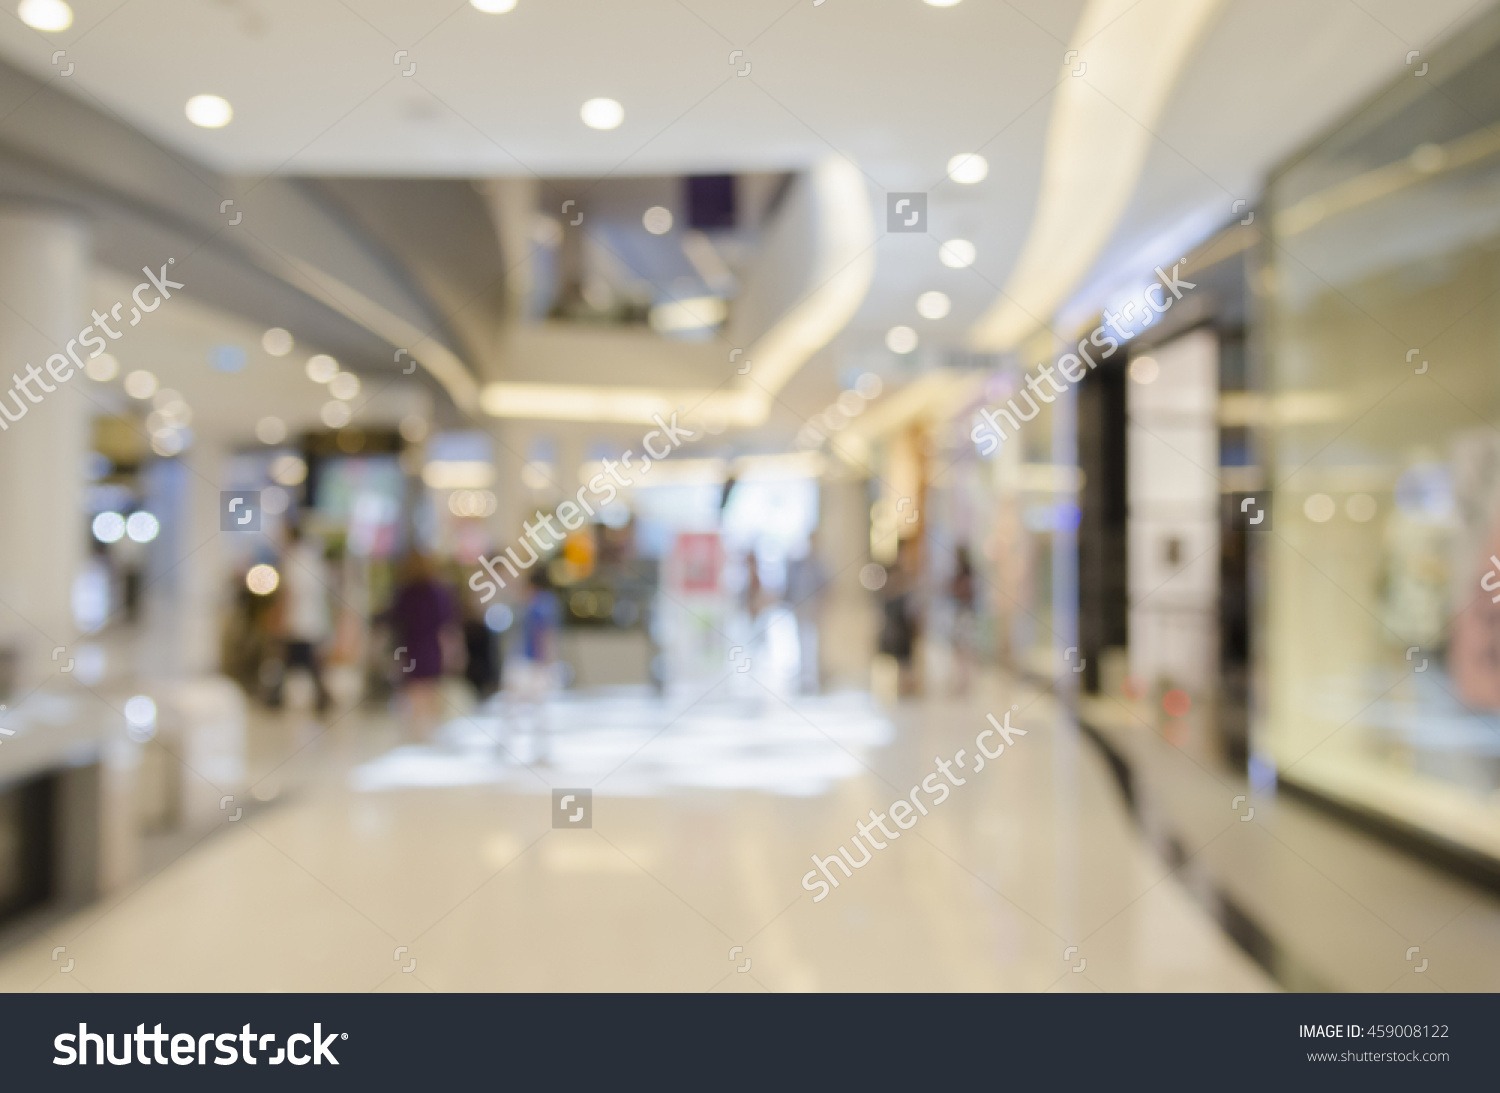 stock-photo-abstract-blur-shopping-mall-interior-and-retail-store-for-background-459008122